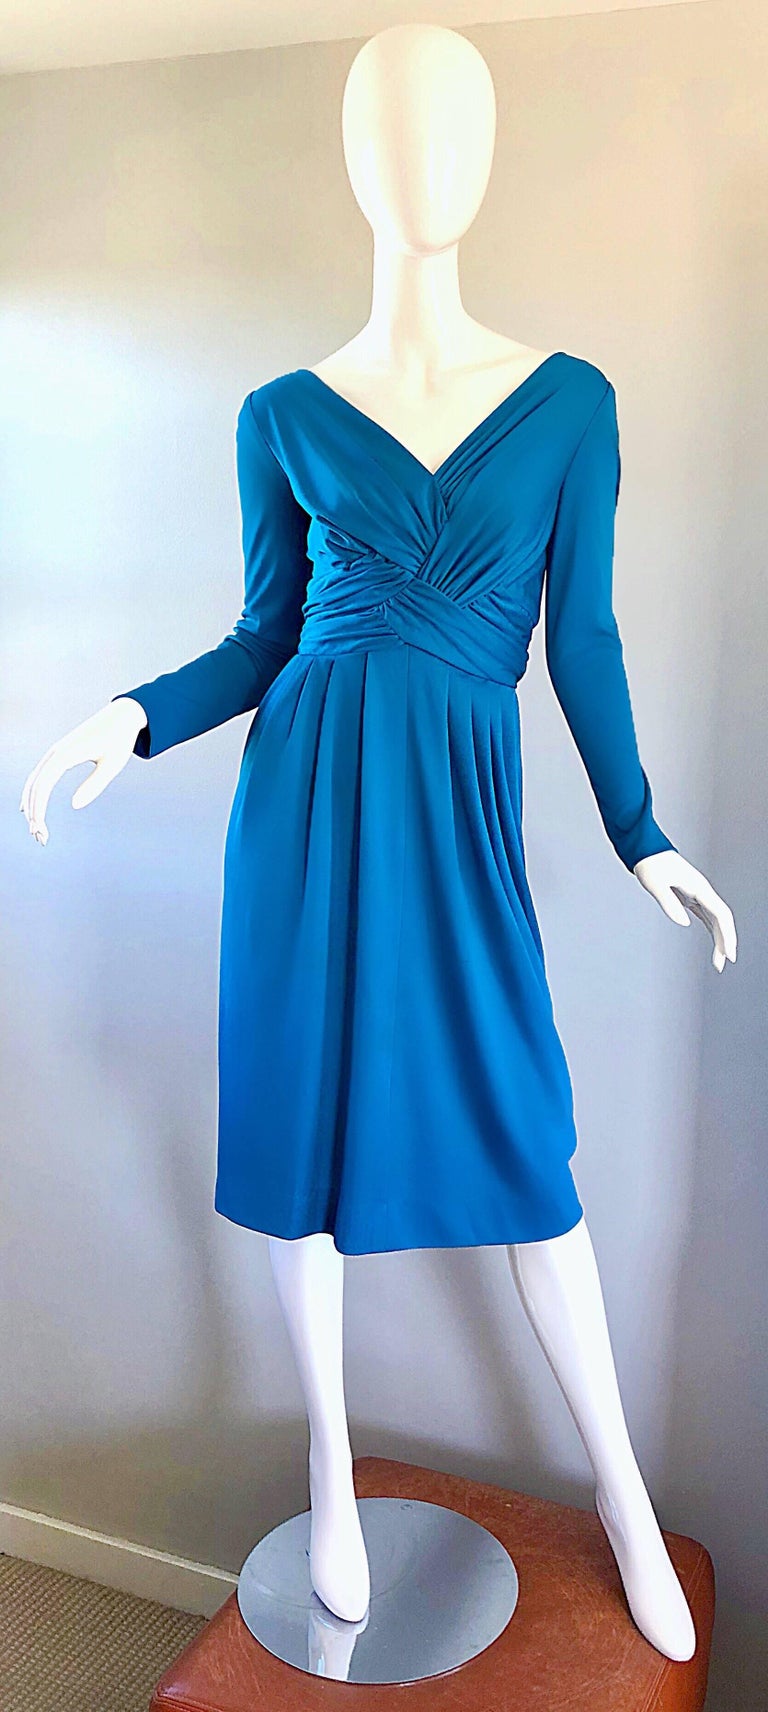 Beautiful 1970s LILLI DIAMOND teal blue long sleeve jersey dress! Features flattering ruching on the bodice, with sleek tailored long sleeves. Flirty skirt has gathers the start at the waistband and go down, resulting in a flattering flirty fit.